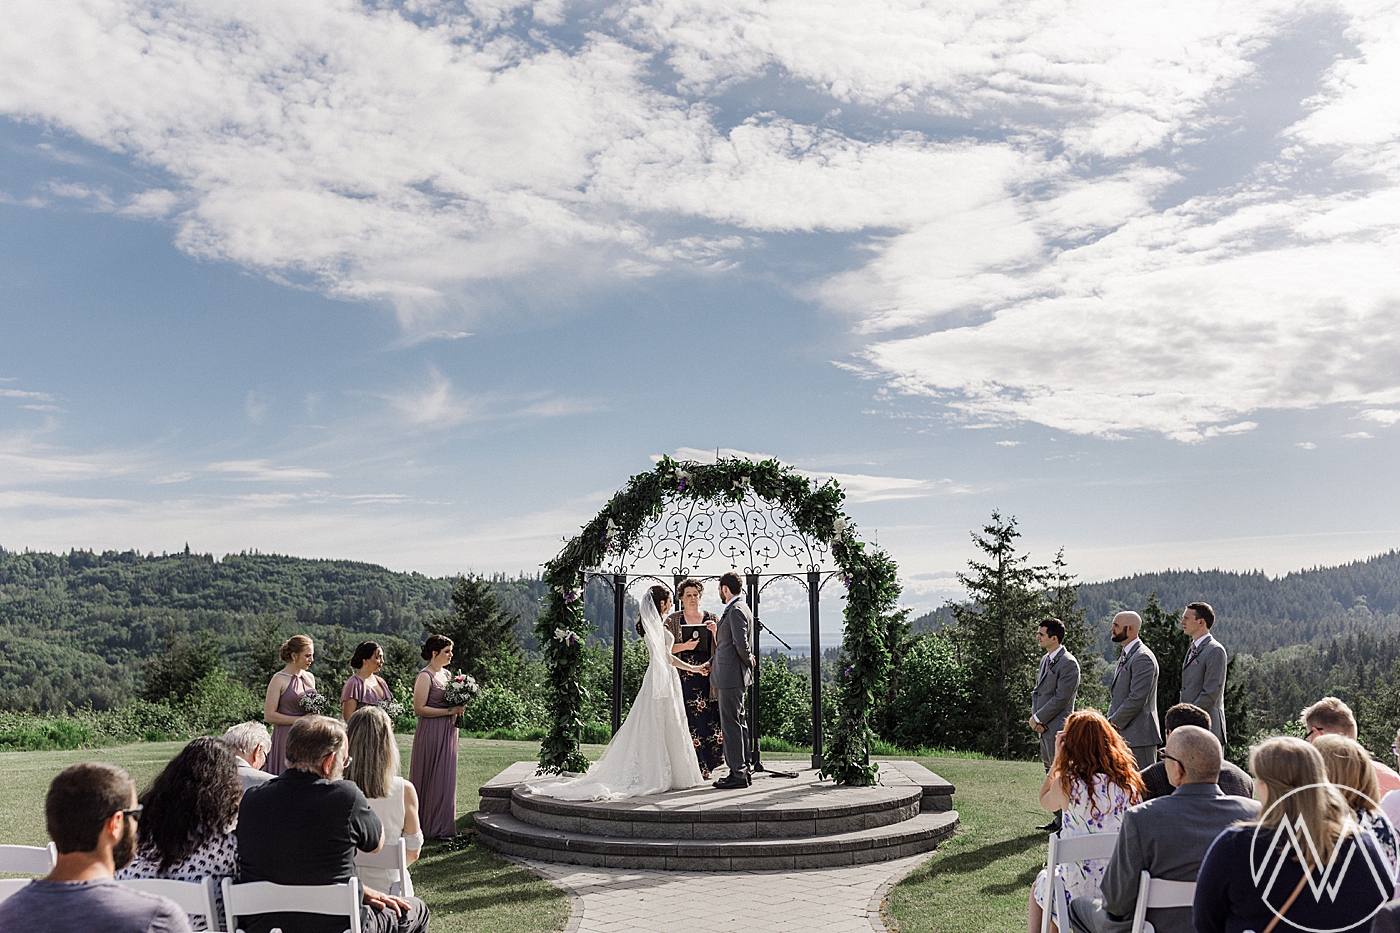 Intimate wedding ceremony at Eaglemont Golf Course overlooking the Olympic Mountains. Photographed by Mount Vernon Wedding Photographer, Megan Montalvo Photography. 